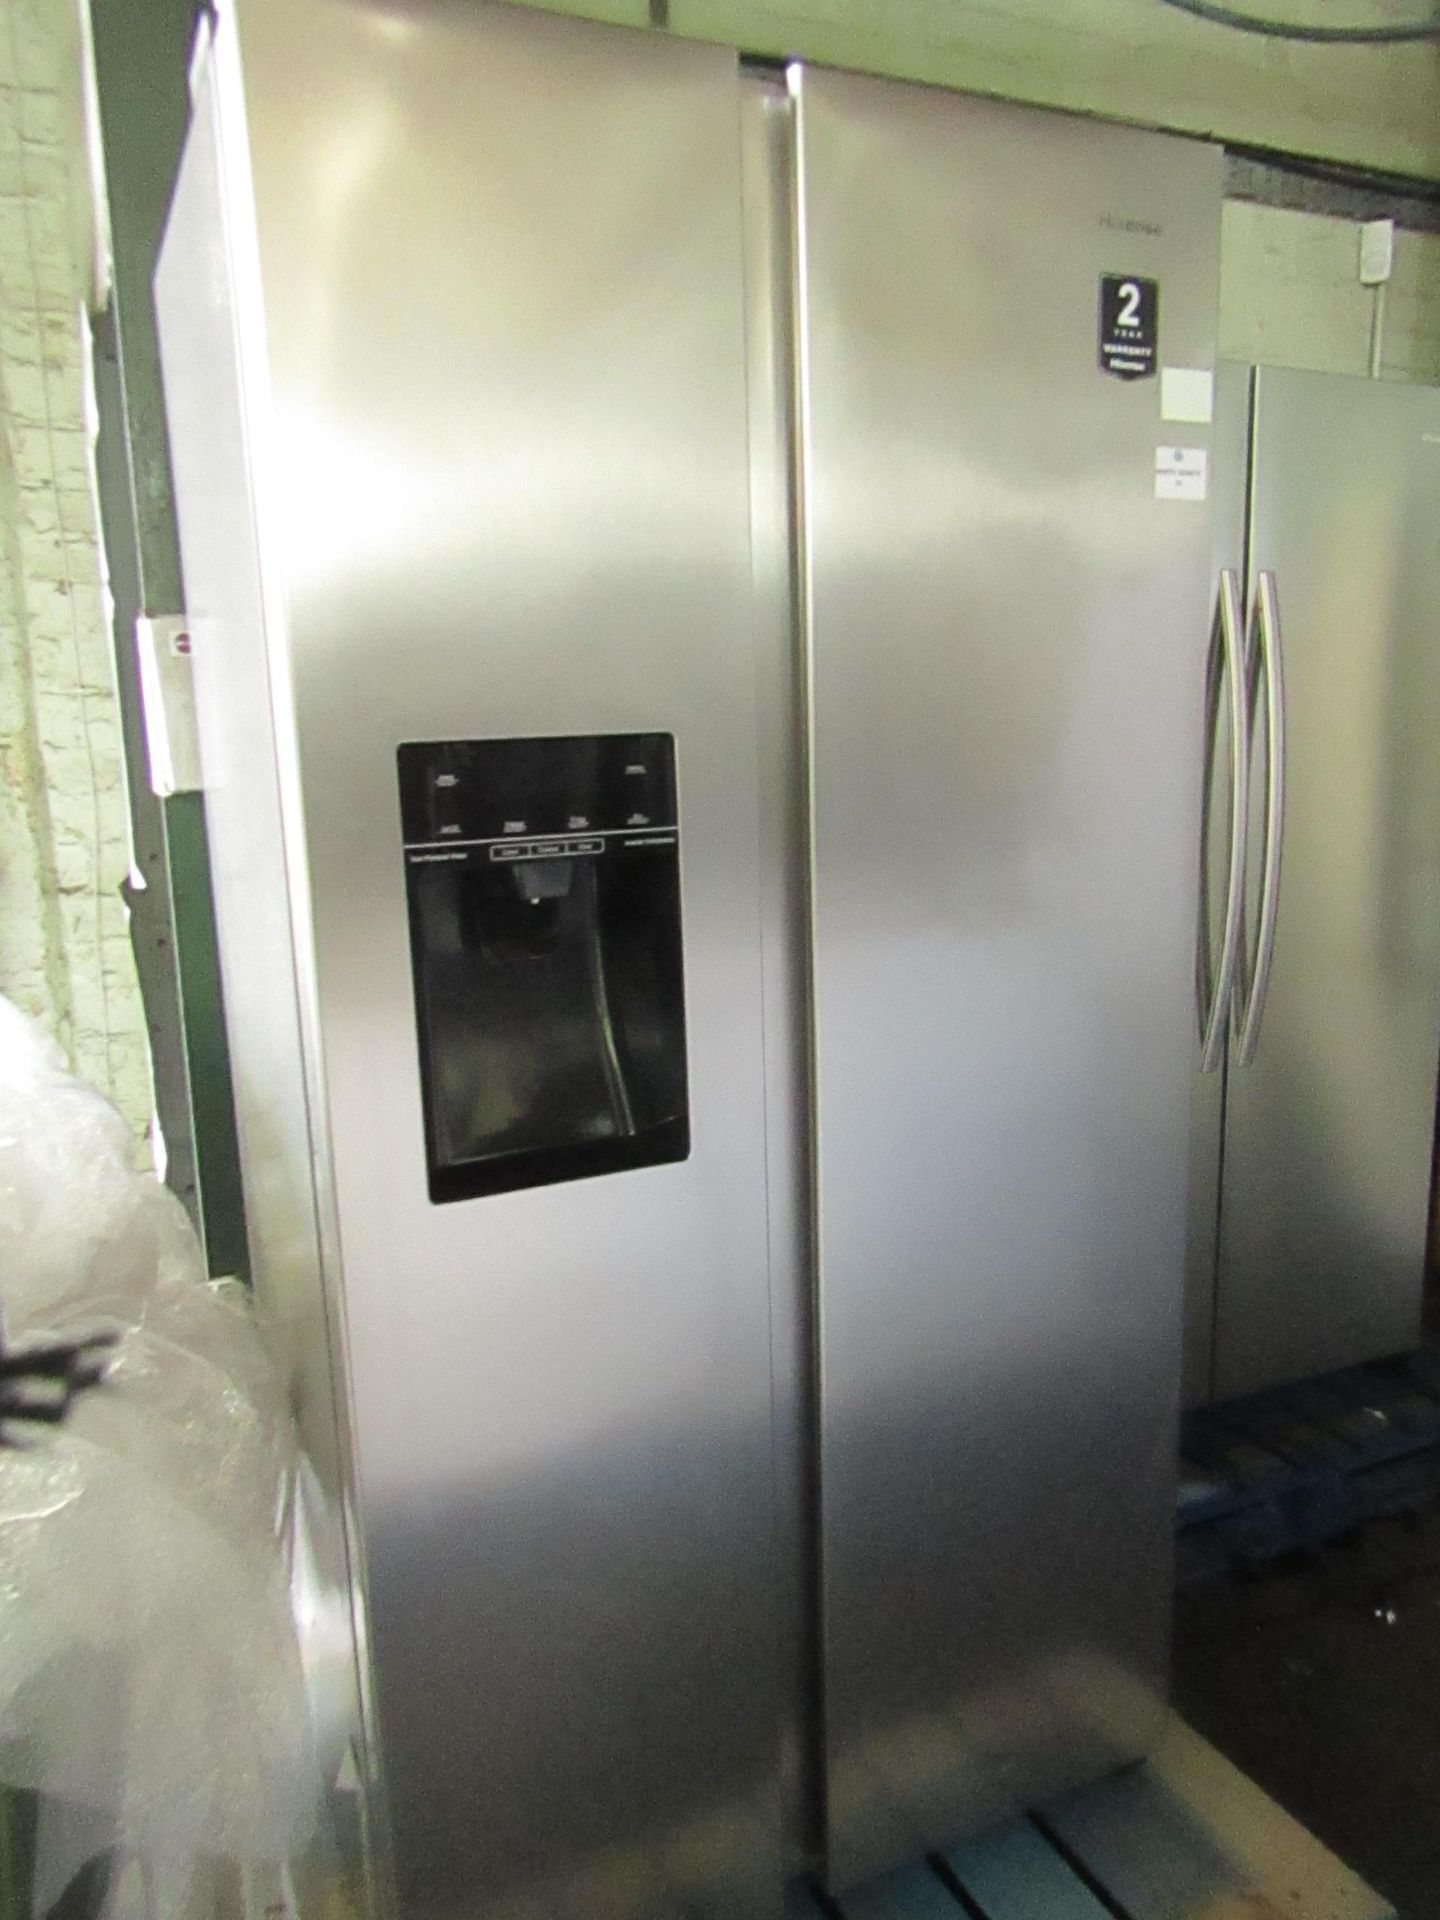 Hisense - American Fridge Freezer - Stainless Steel - F Rated - Powers On & Cold Tested Working.